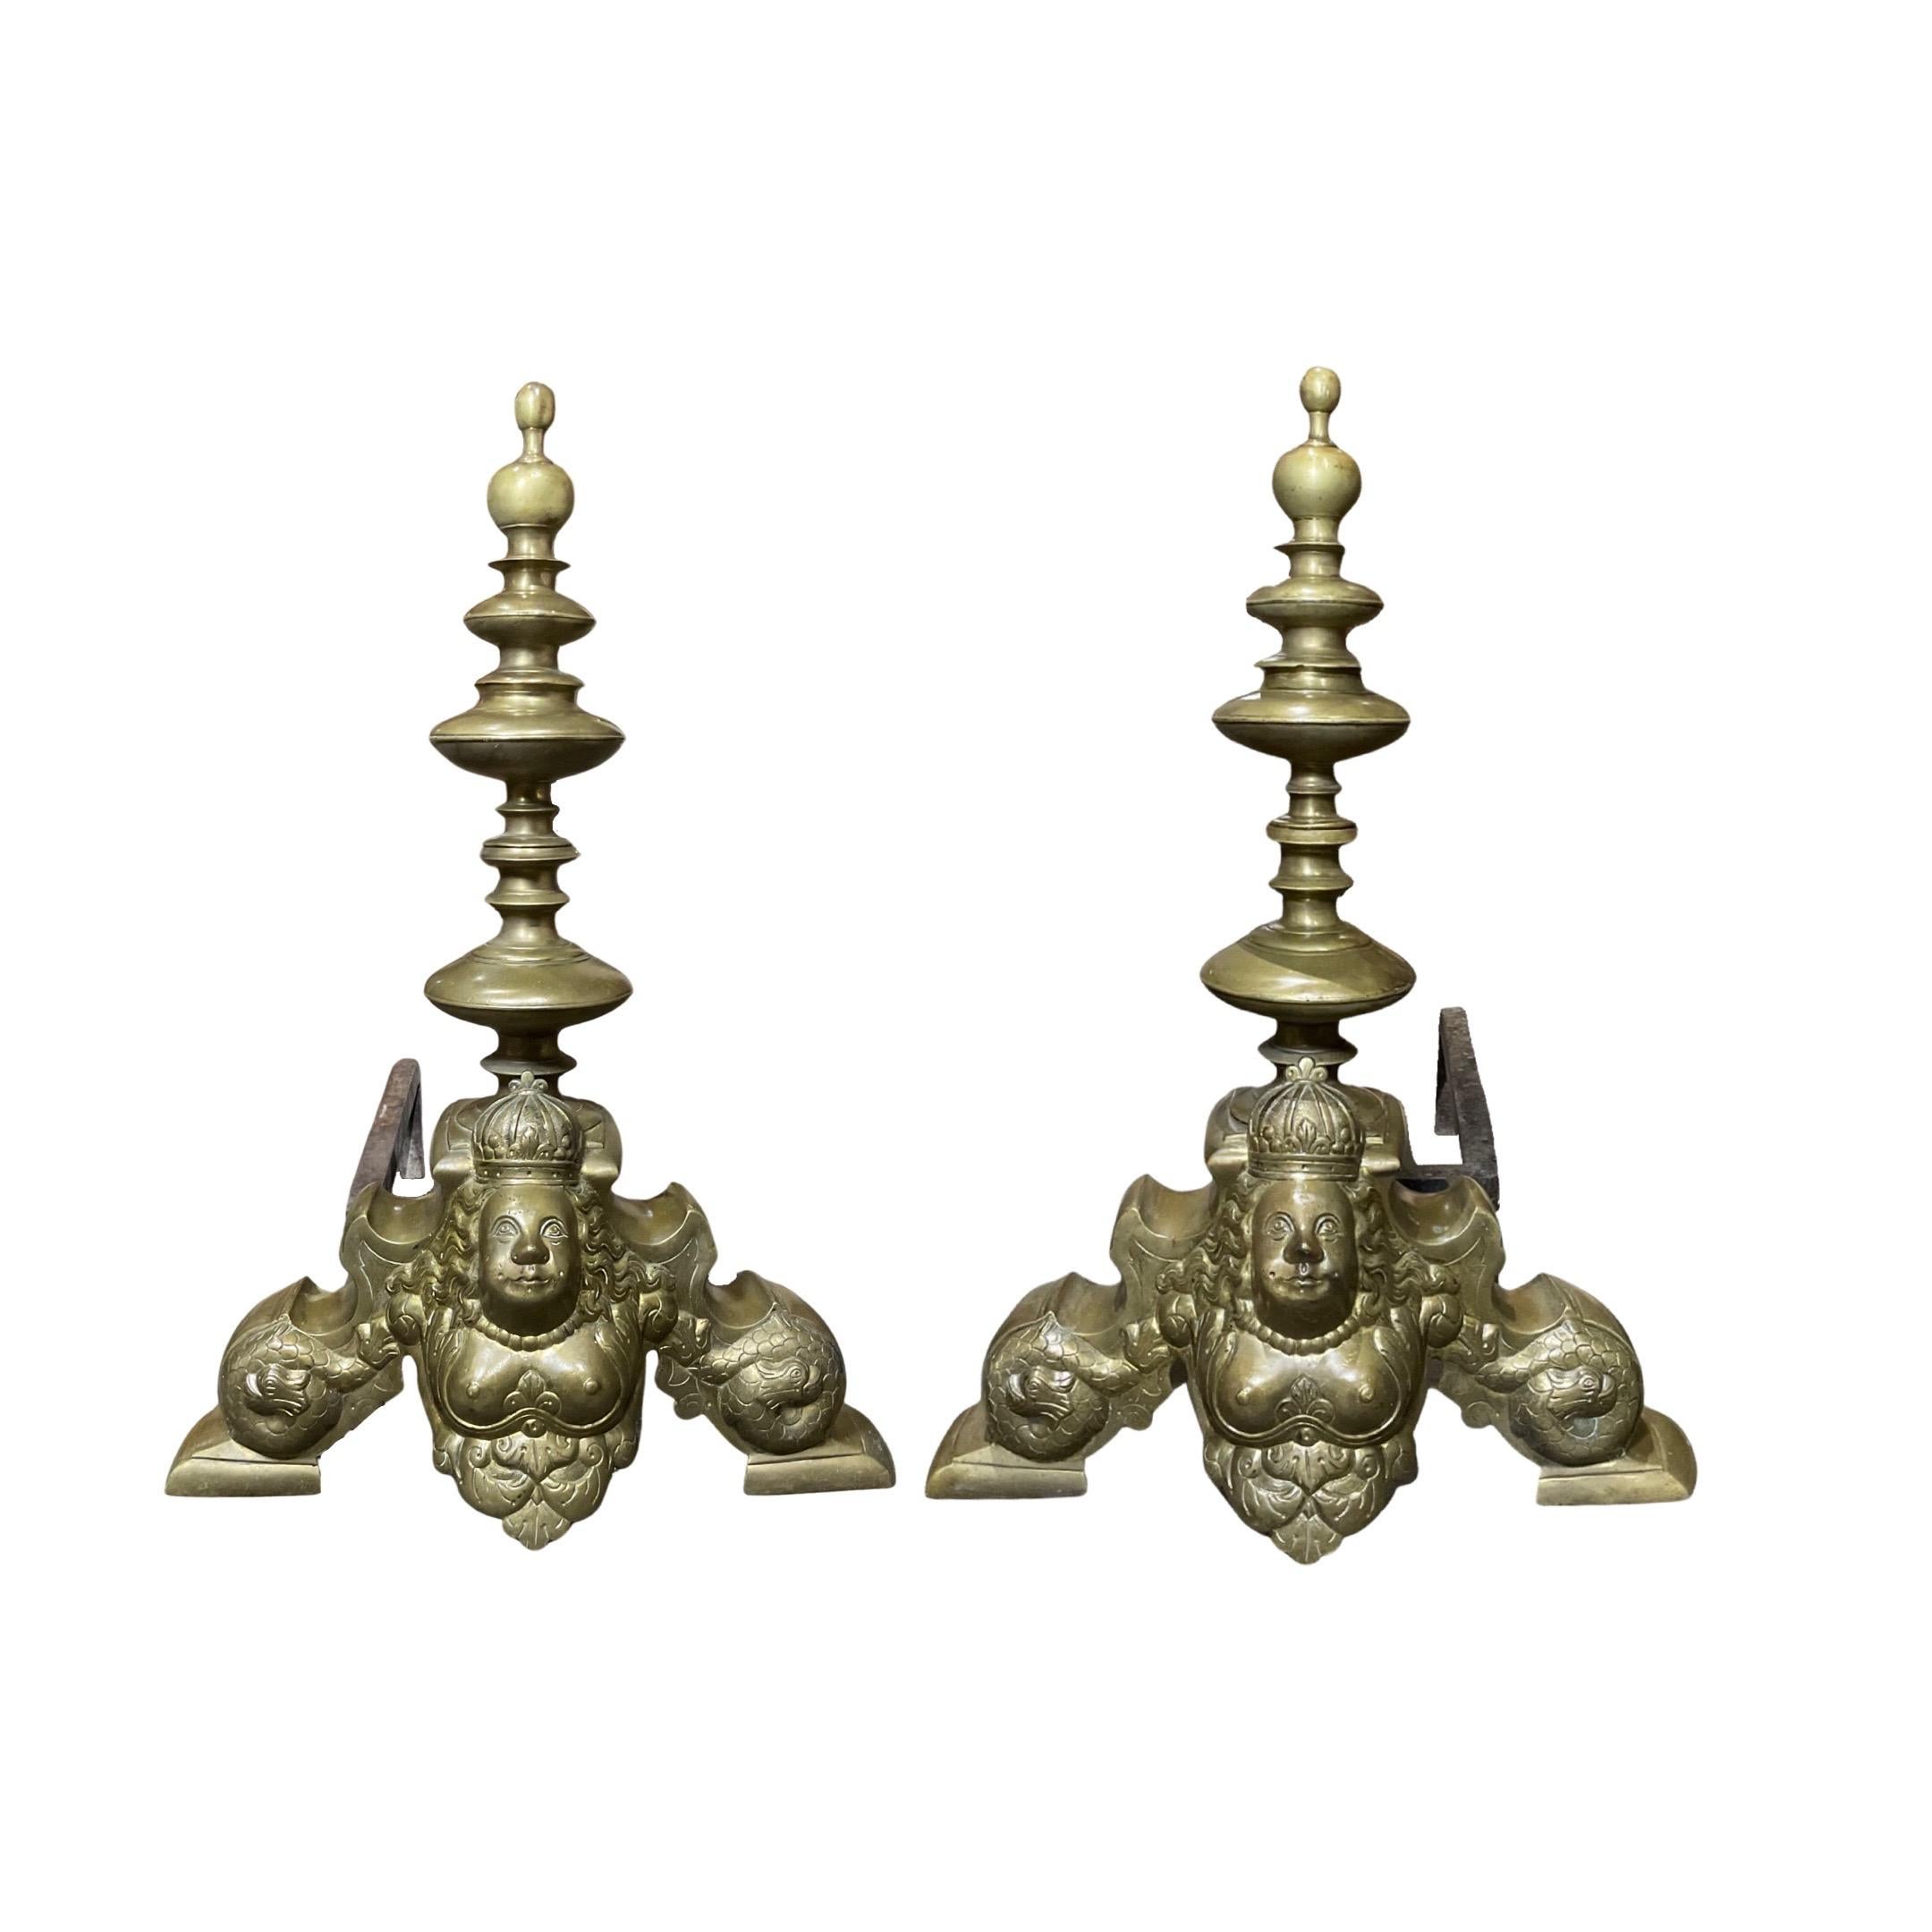 Bring classical beauty to your hearth with these 18th Century French Bronze Andirons. Crafted from bronzed metal, these andirons make a beautiful and timeless piece for any fireplace. Their durable construction ensures these andirons will remain a